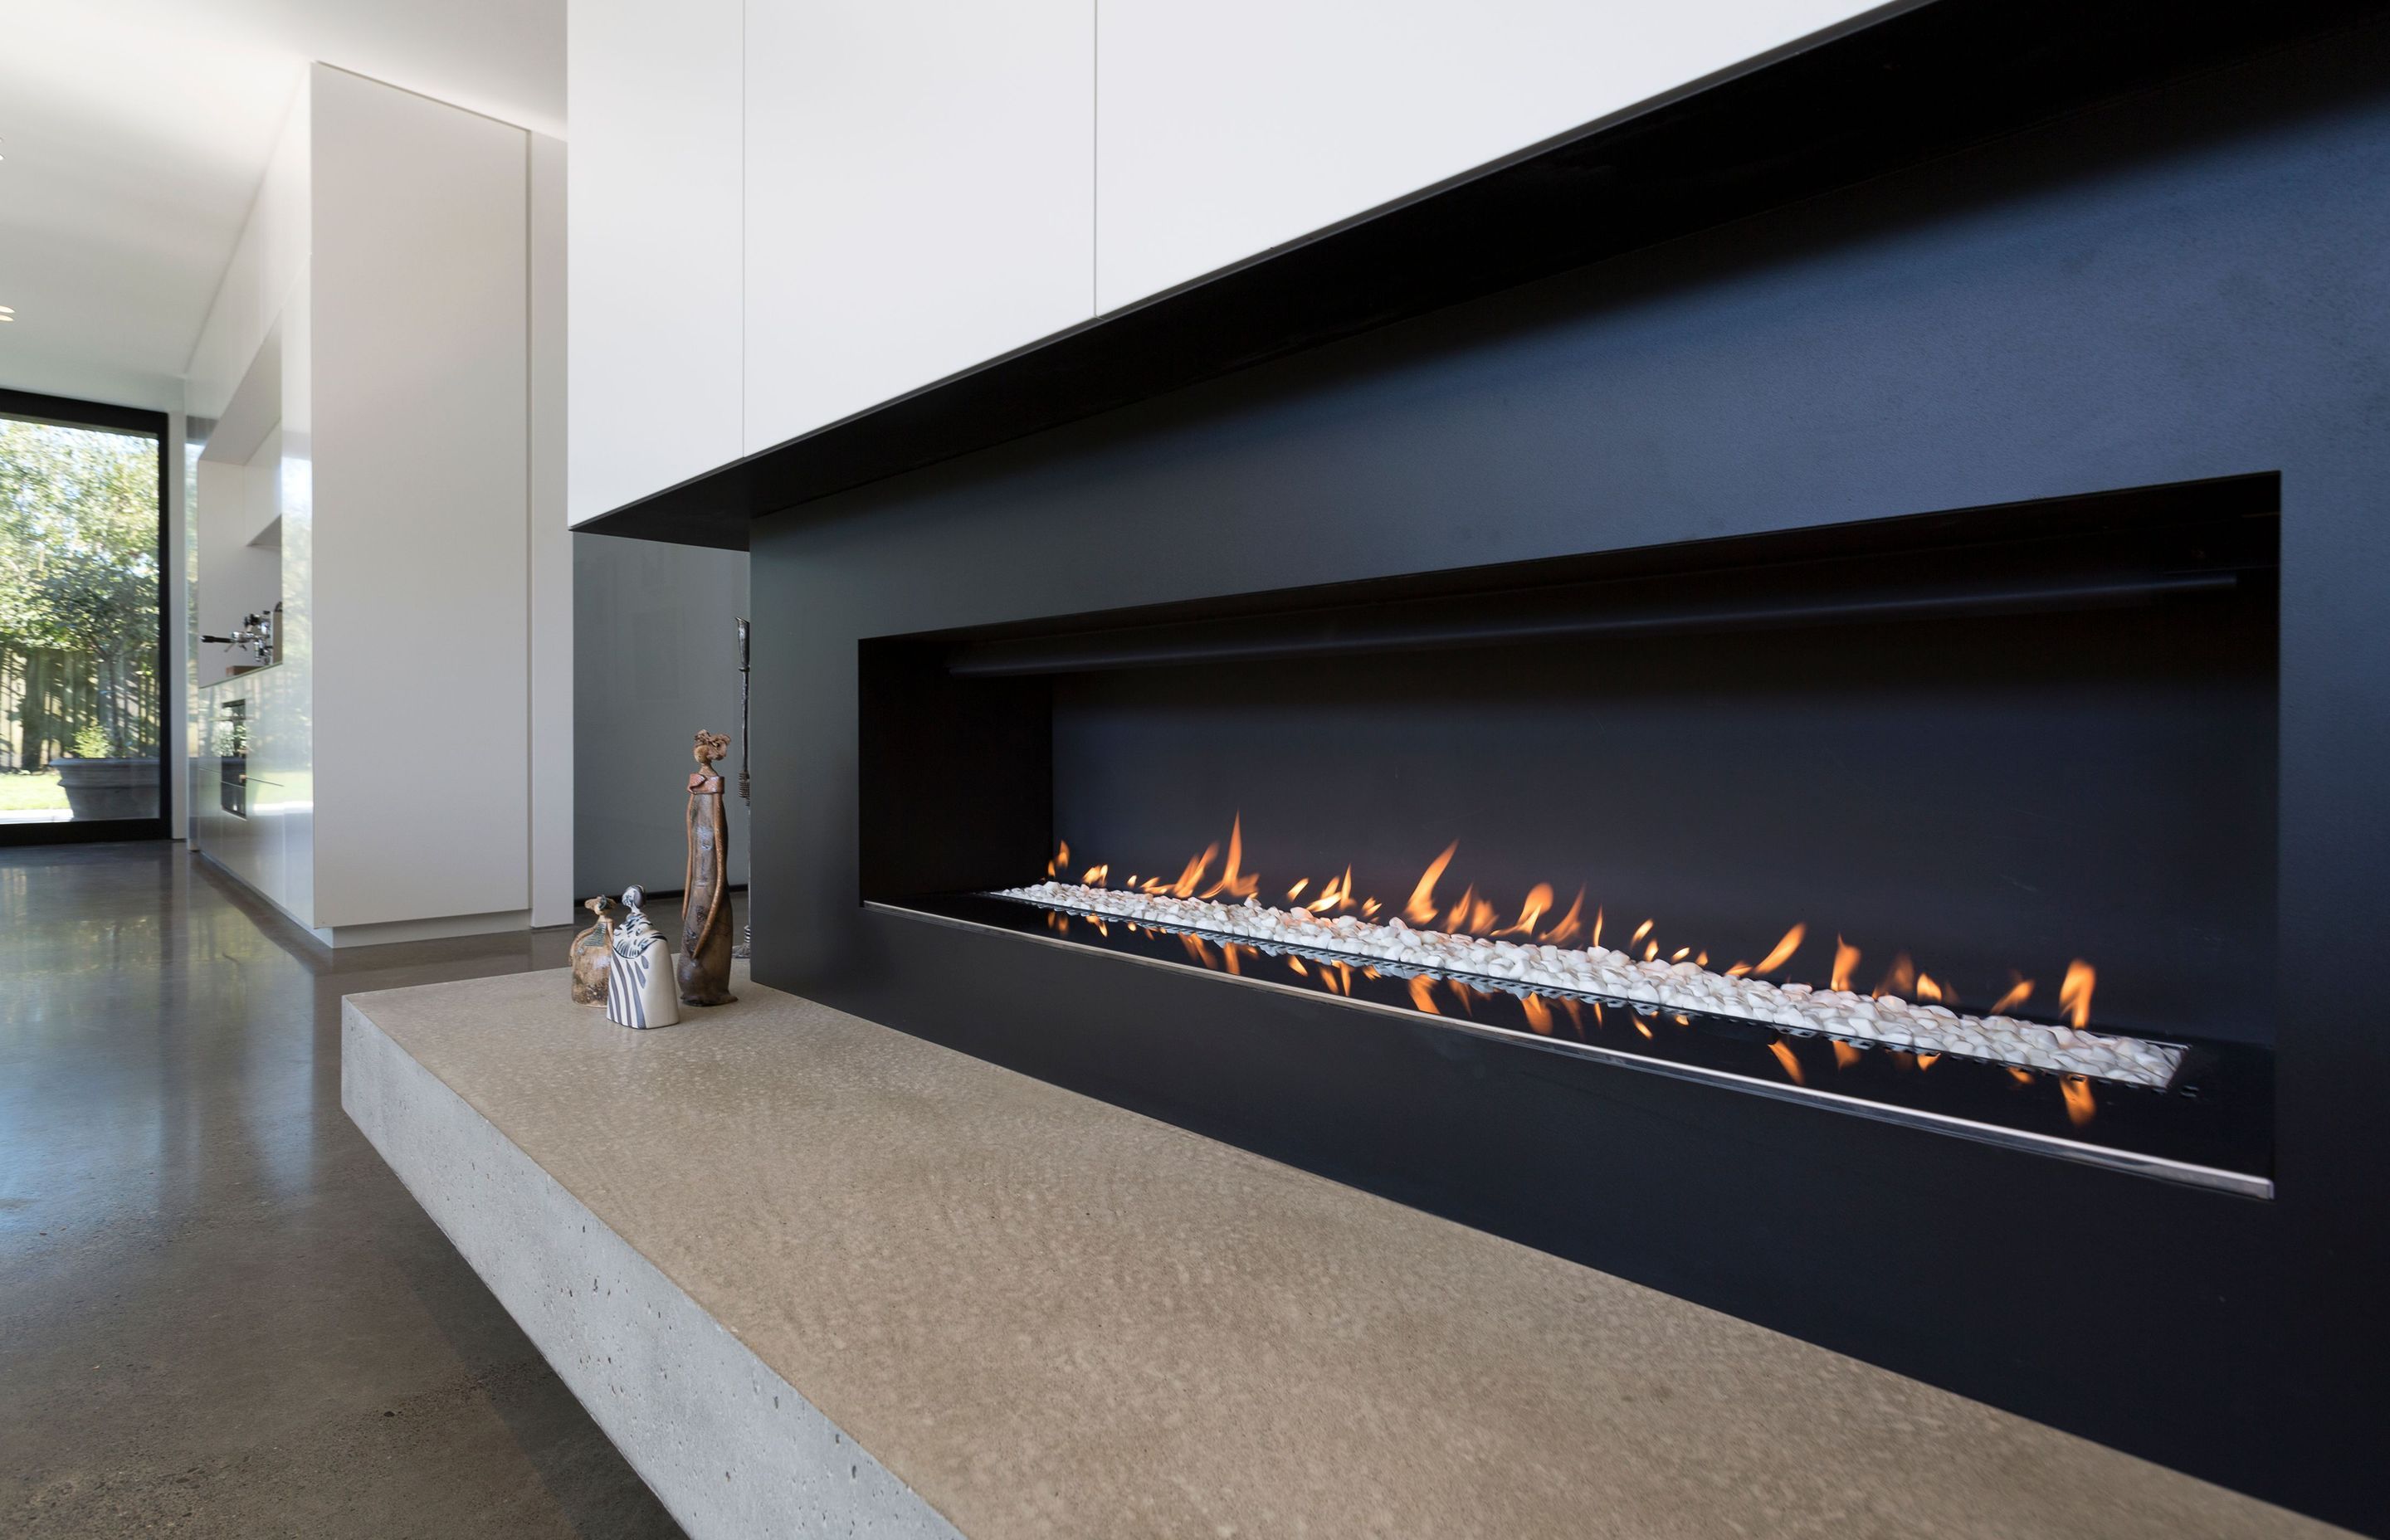 In the lounge area, the fireplace has all-black surrounds with a solid concrete hearth.